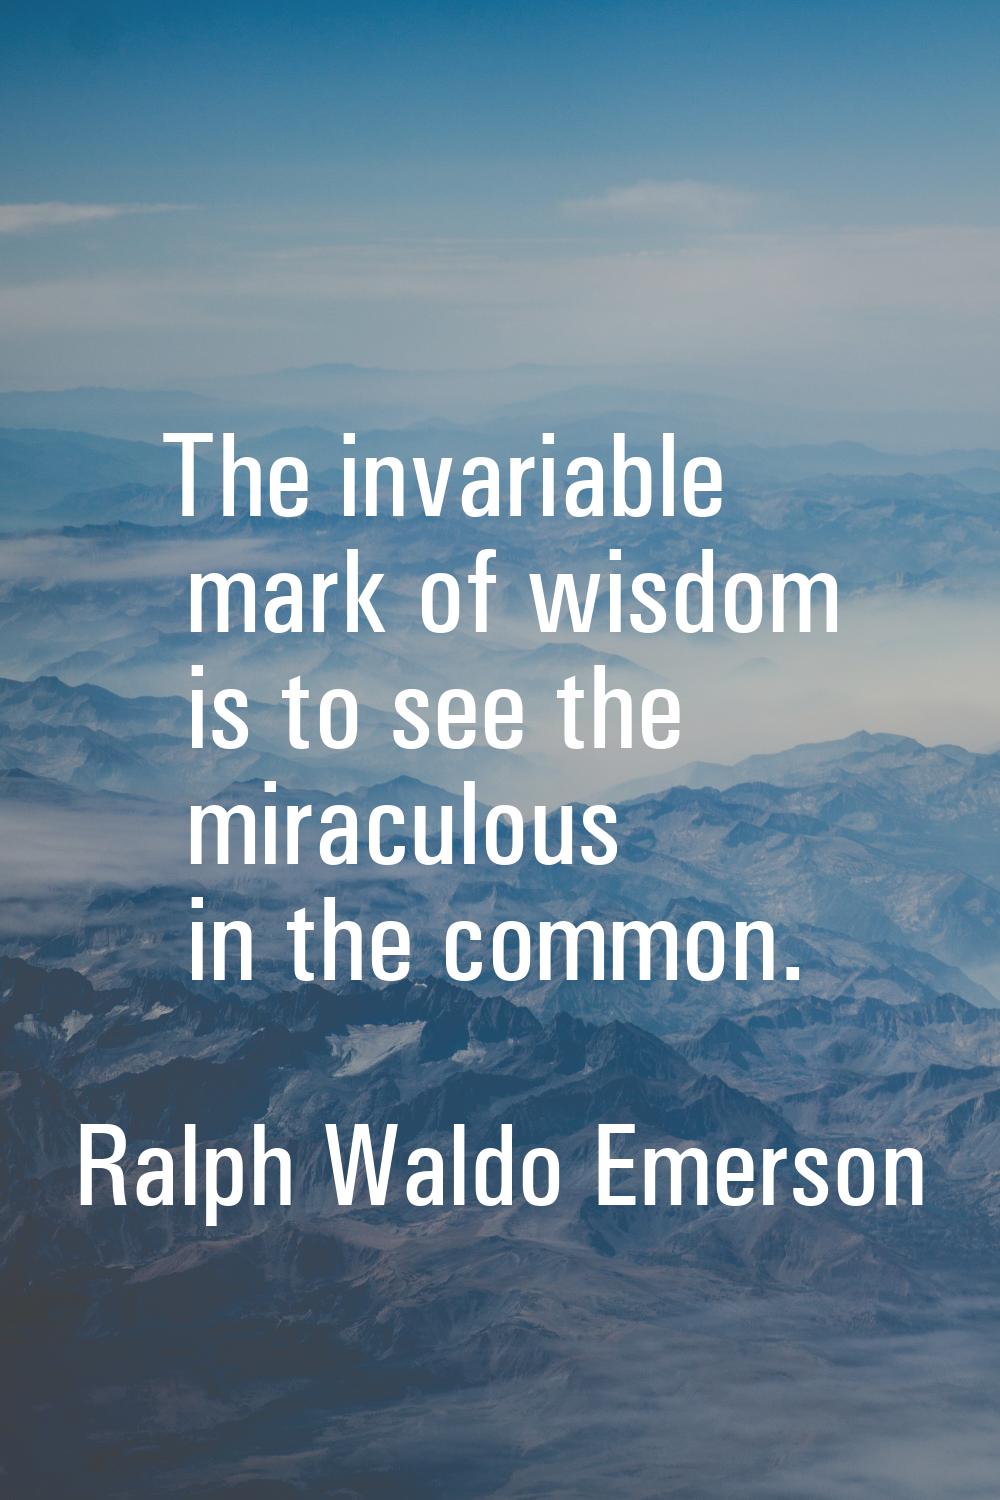 The invariable mark of wisdom is to see the miraculous in the common.